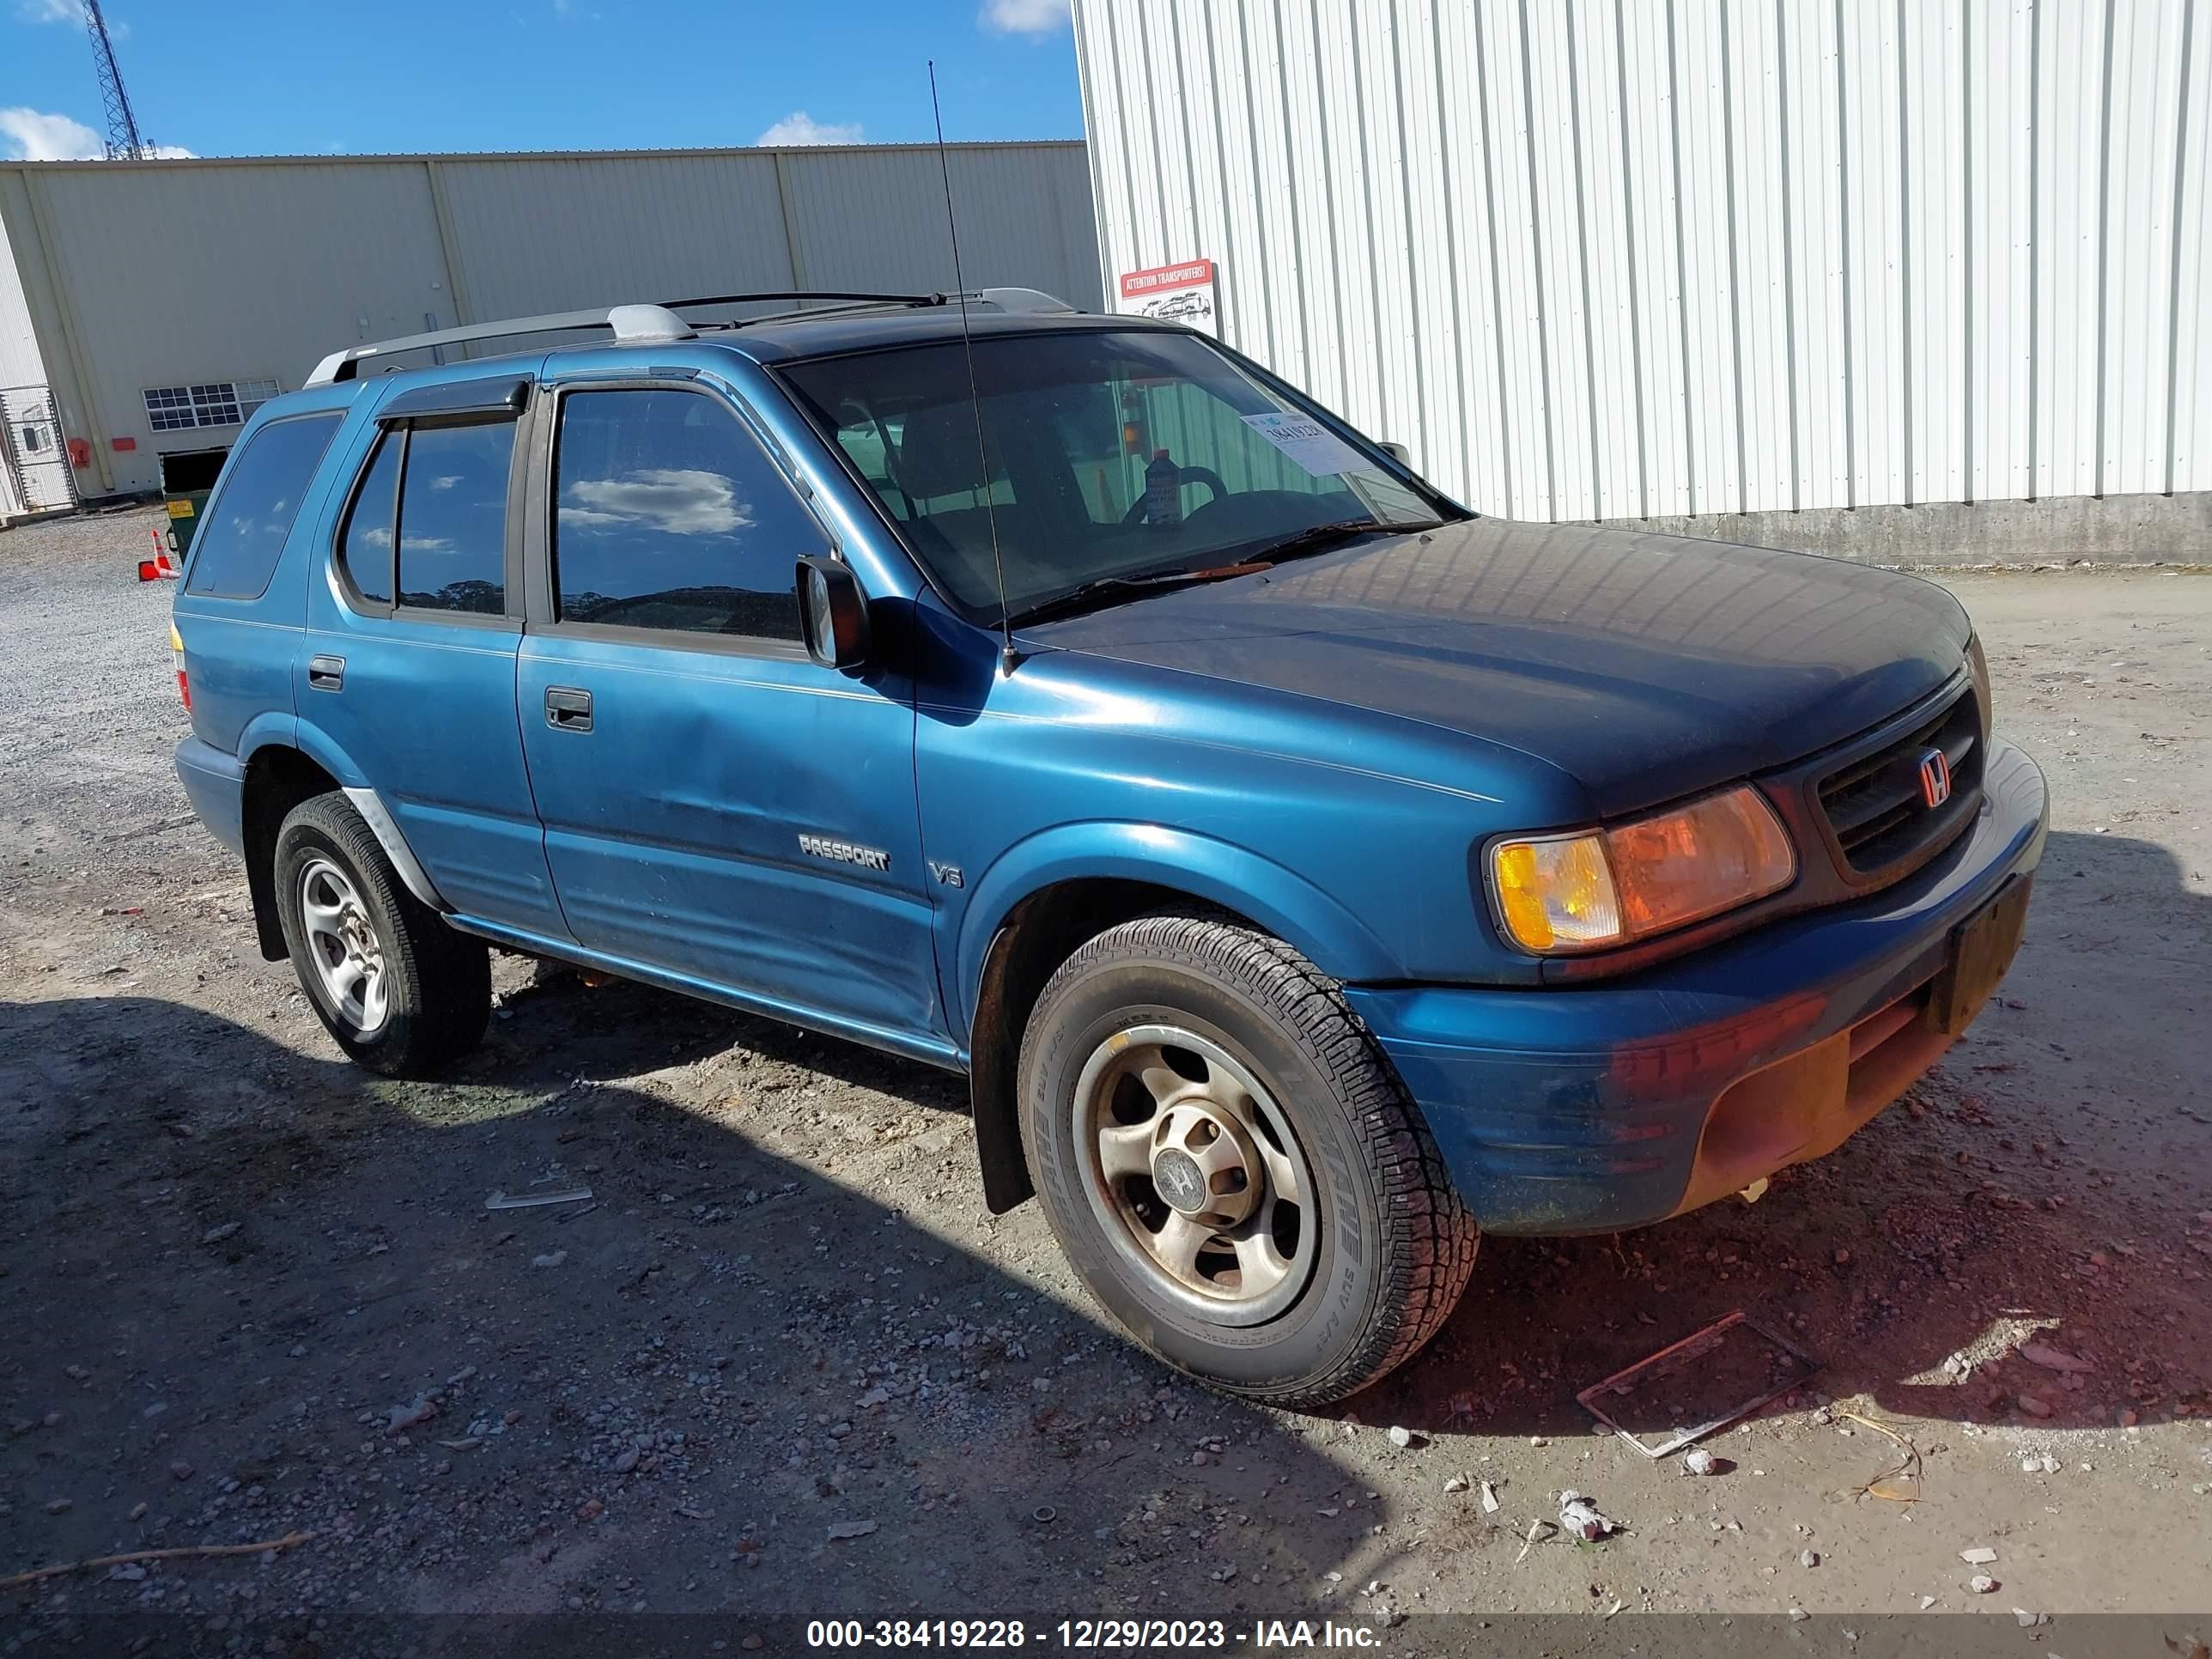 vin: 4S6CK58WXY4415931 4S6CK58WXY4415931 2000 honda passport 3200 for Sale in 39562, 8209 Old Stage Rd, Moss Point, USA